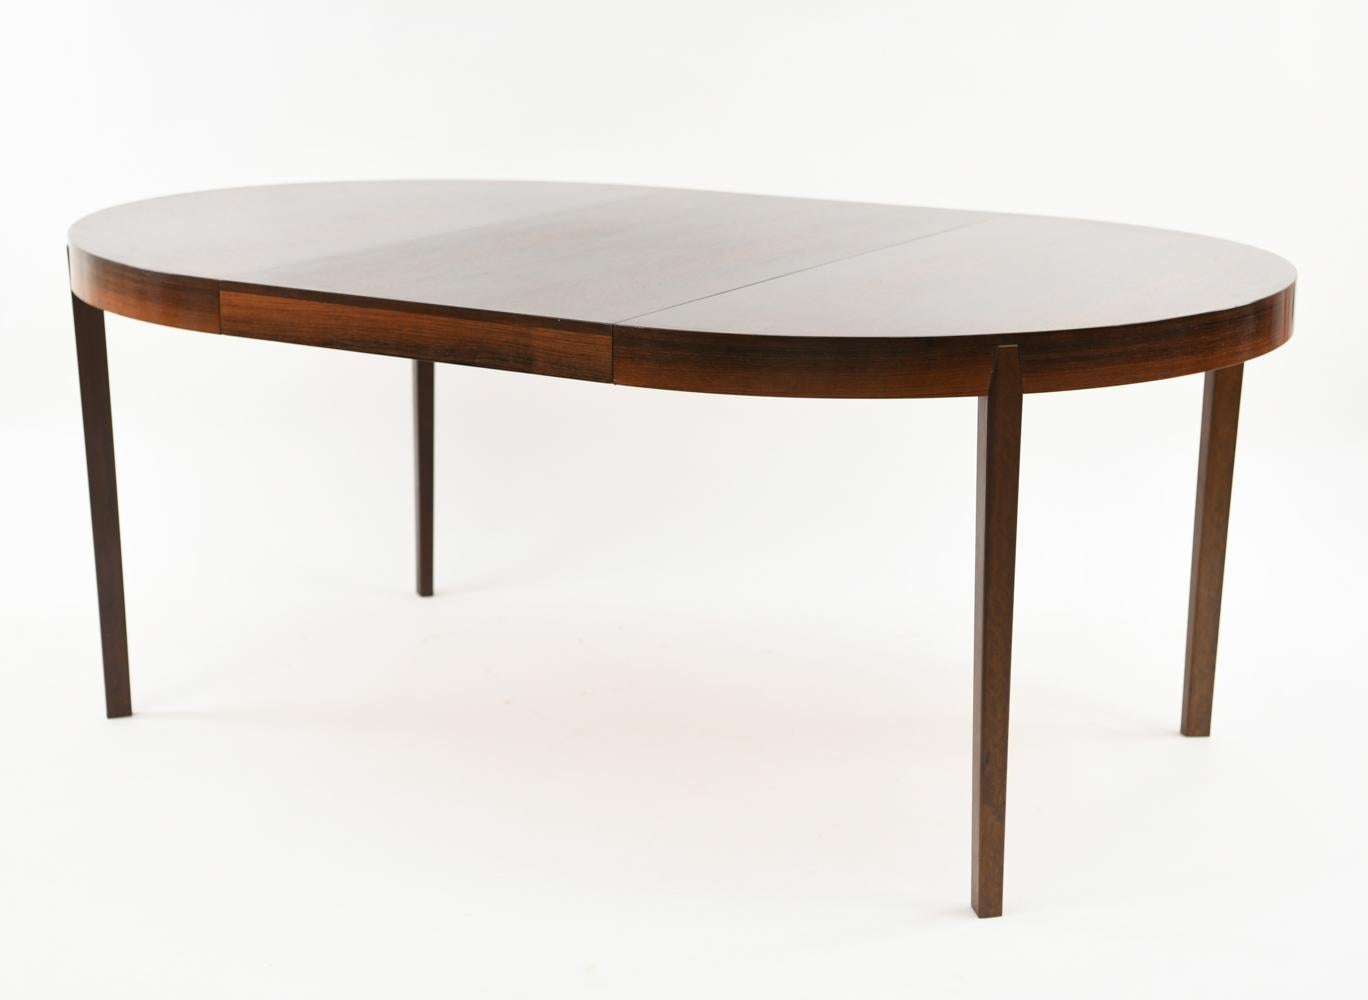 A handsome circular dining table with two leaves designed by Niels Koefoed for Hornslet Mobler, circa 1960s. This elegant table is crafted of high quality rosewood with a stunning color and grain to match the attractive, refined Scandinavian Modern